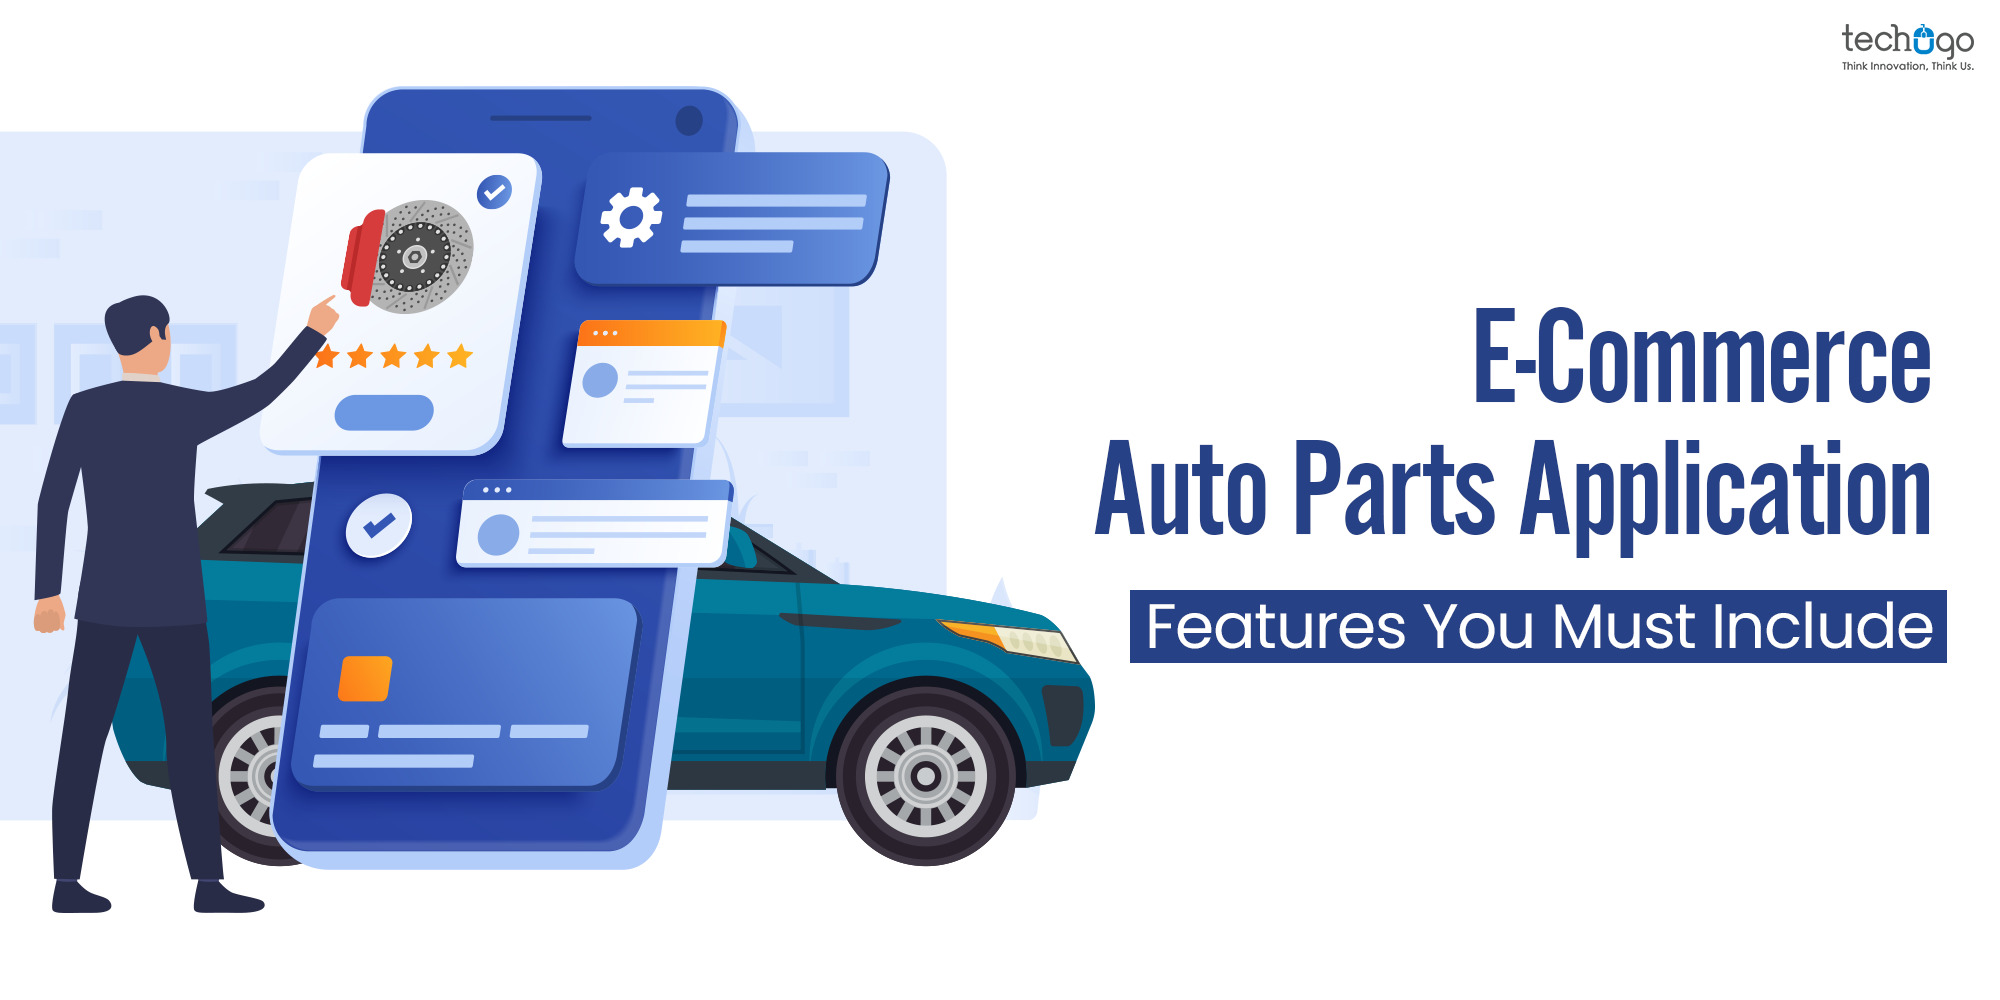 E-Commerce Auto Parts Application: Features You Must Include